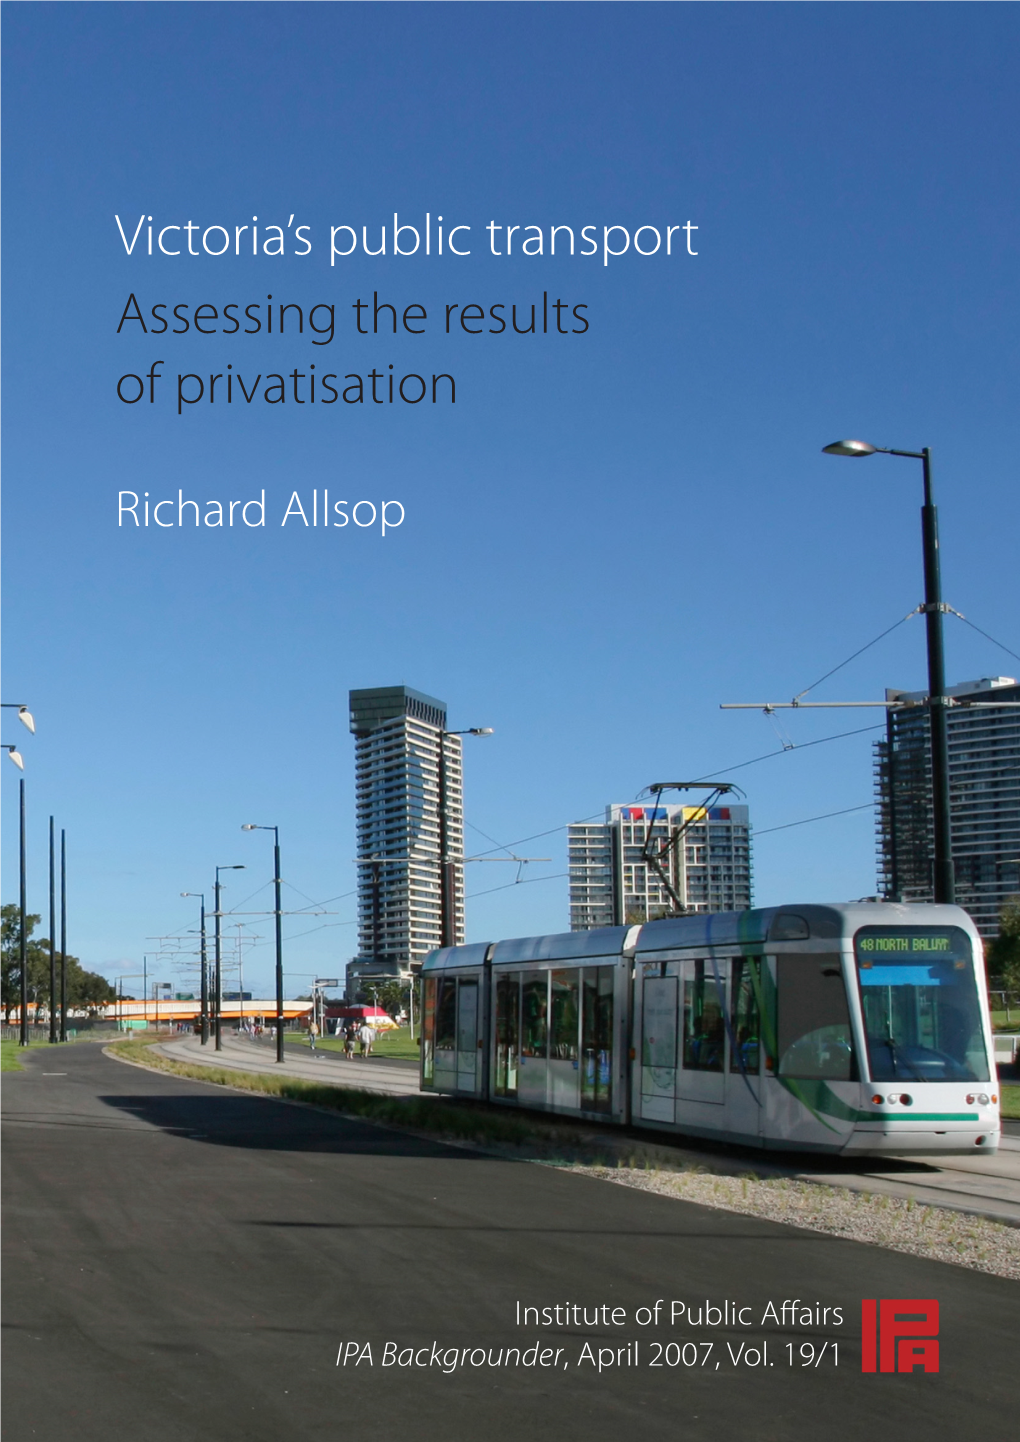 Victoria's Public Transport Assessing the Results of Privatisation